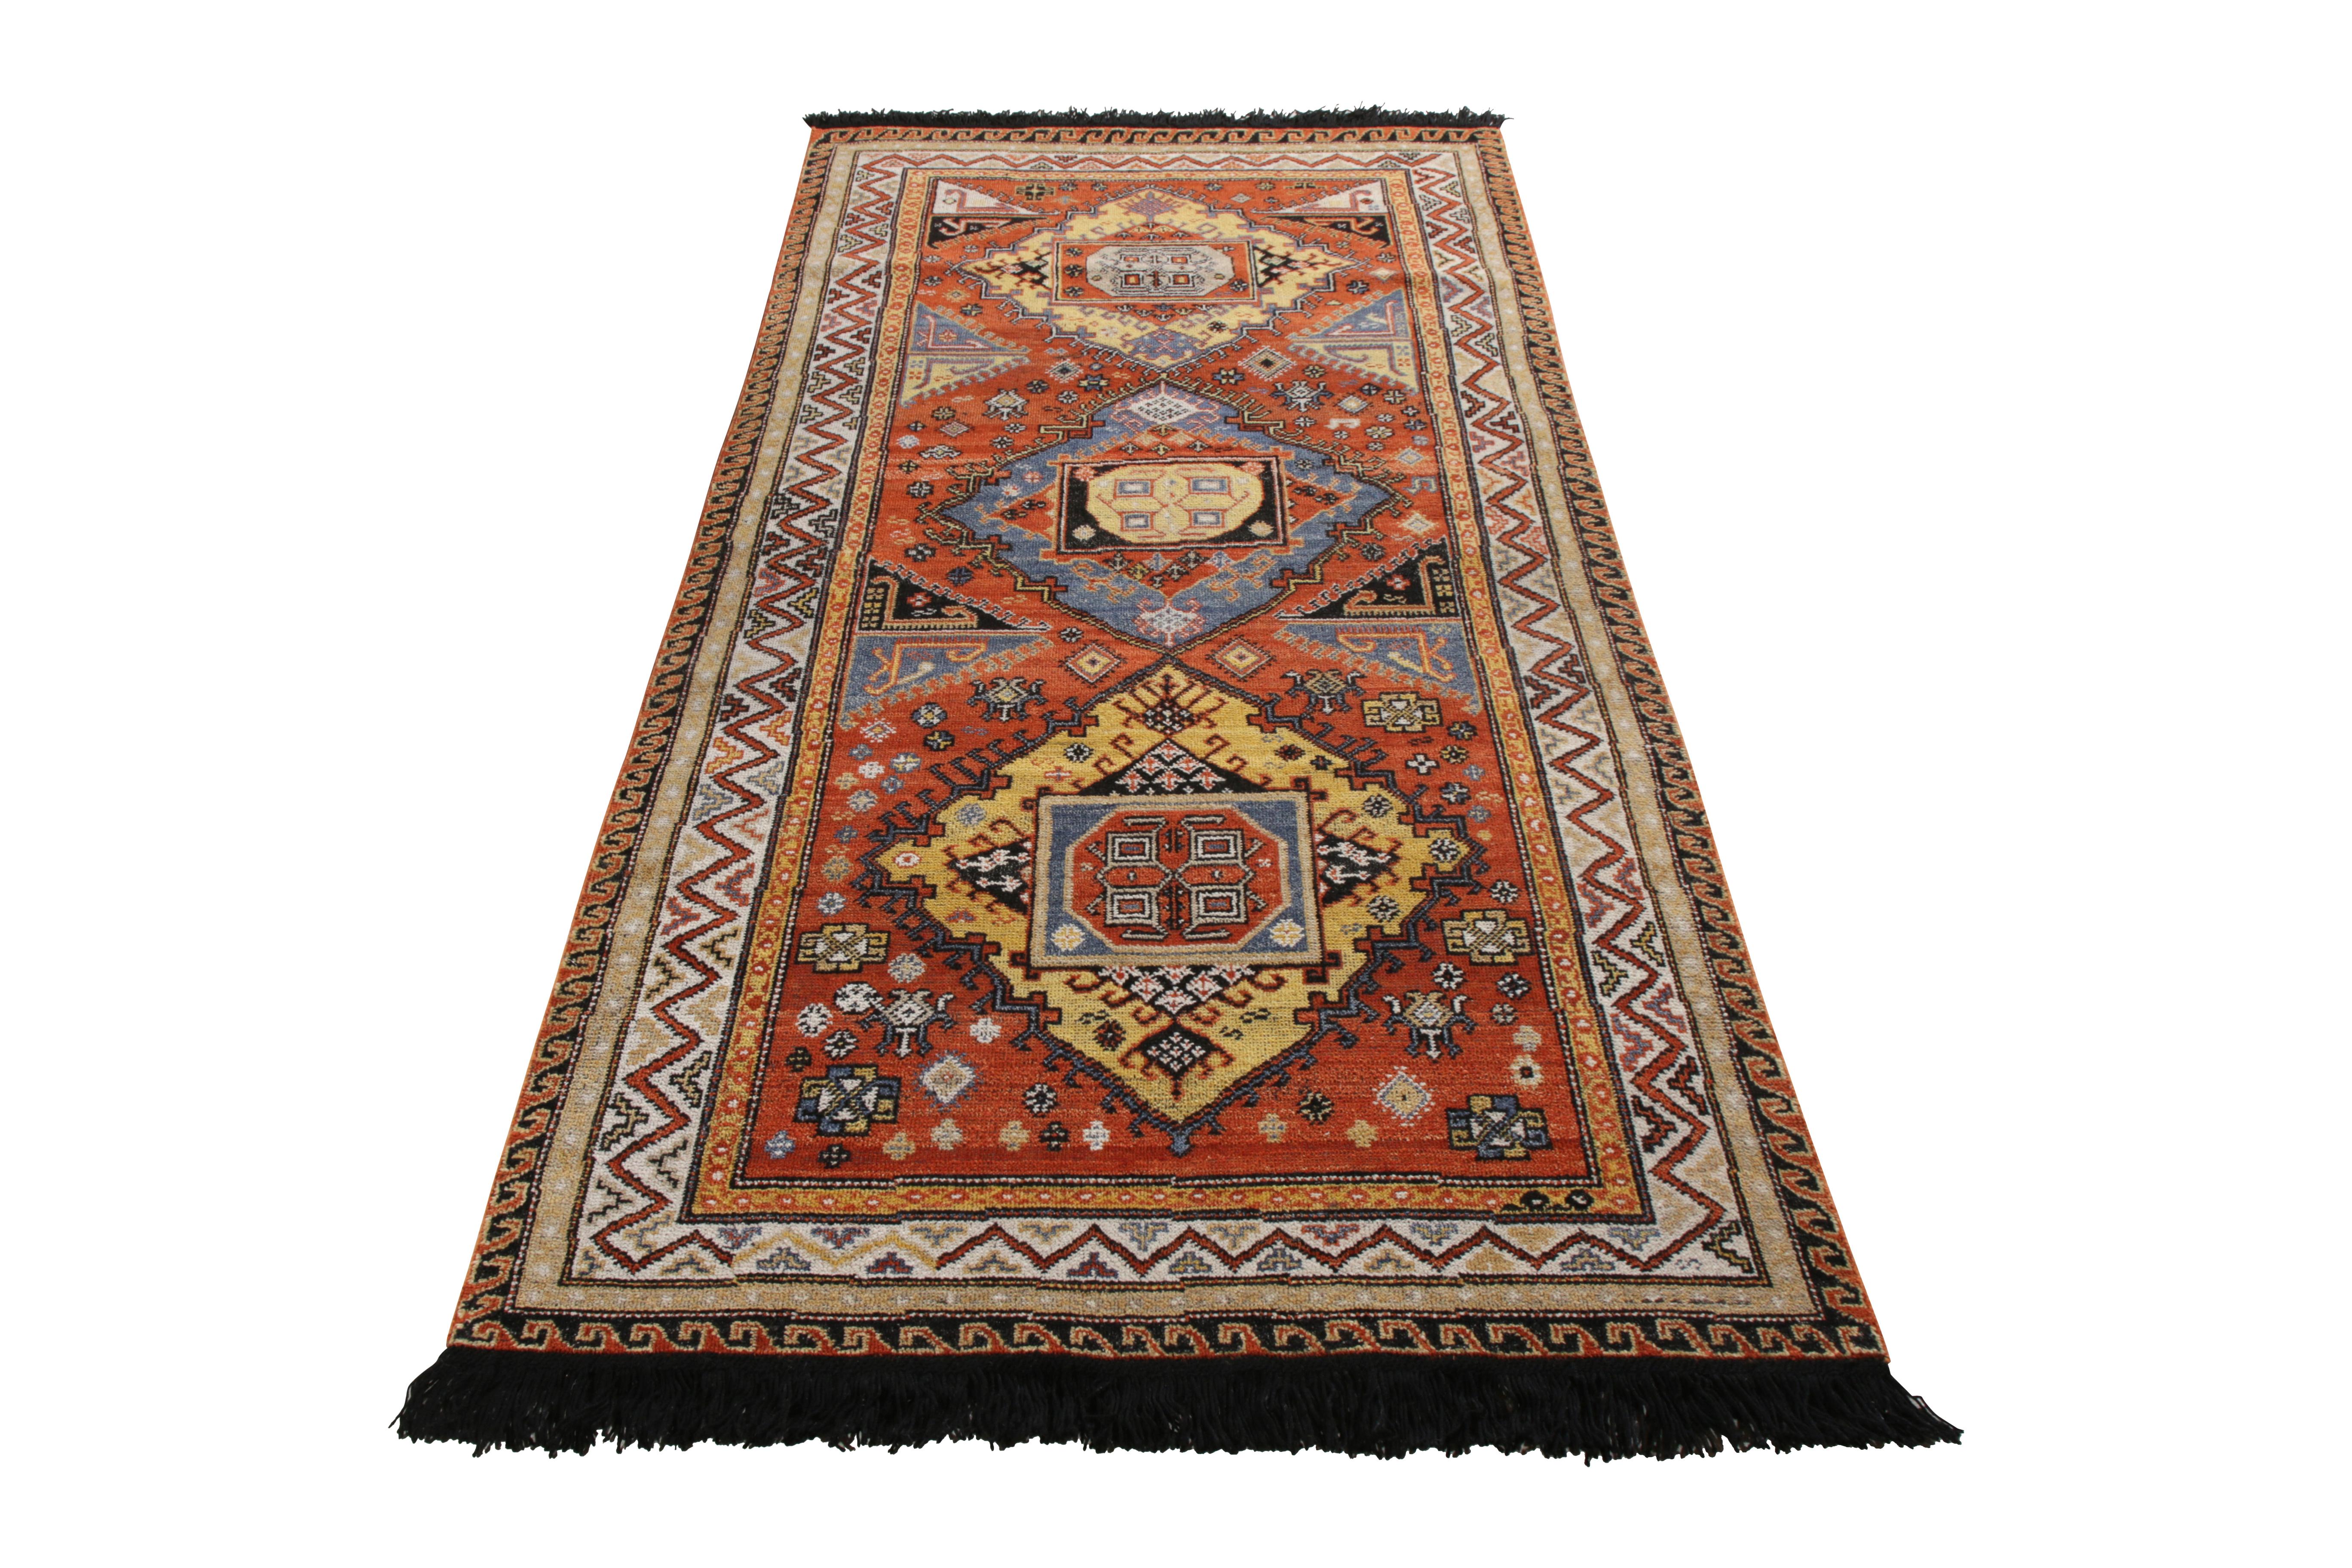 A 4x8 ode to celebrated Soumak rug styles in hand-knotted wool, from Rug & Kilim’s Burano Collection. 
Enjoying warm orange and light gold hues prevailing in tribal medallion patterns, sitting beautifully in near-runner length, well suited to